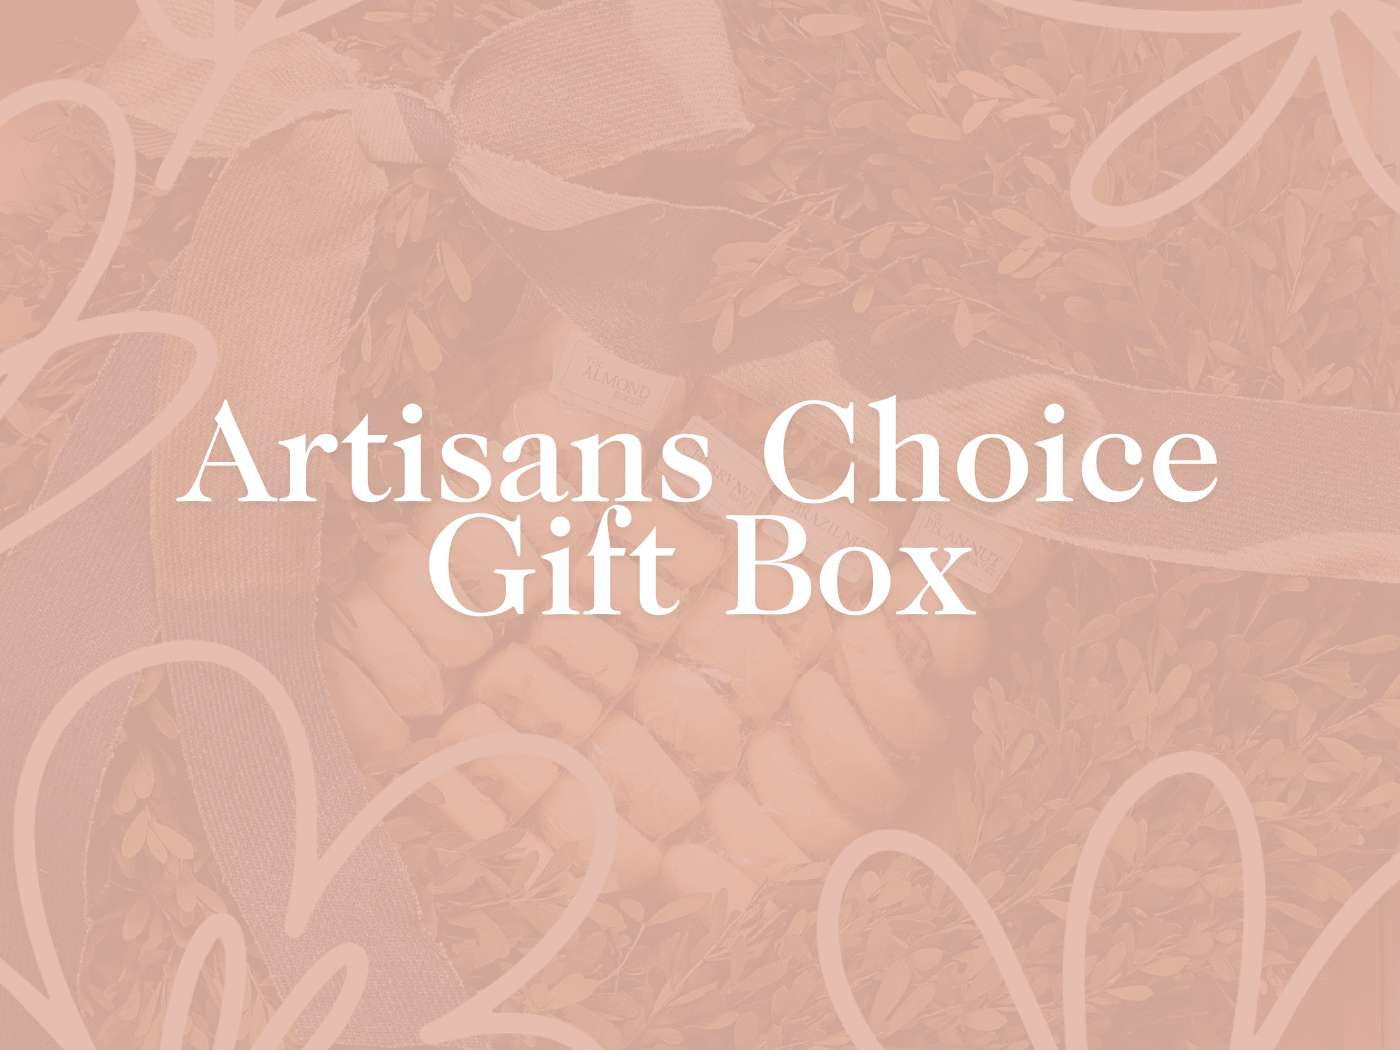 Elegantly presented Artisans Choice Gift Box with a subtle floral background, conveying a sense of bespoke quality and craftsmanship, curated by Fabulous Flowers and Gifts.